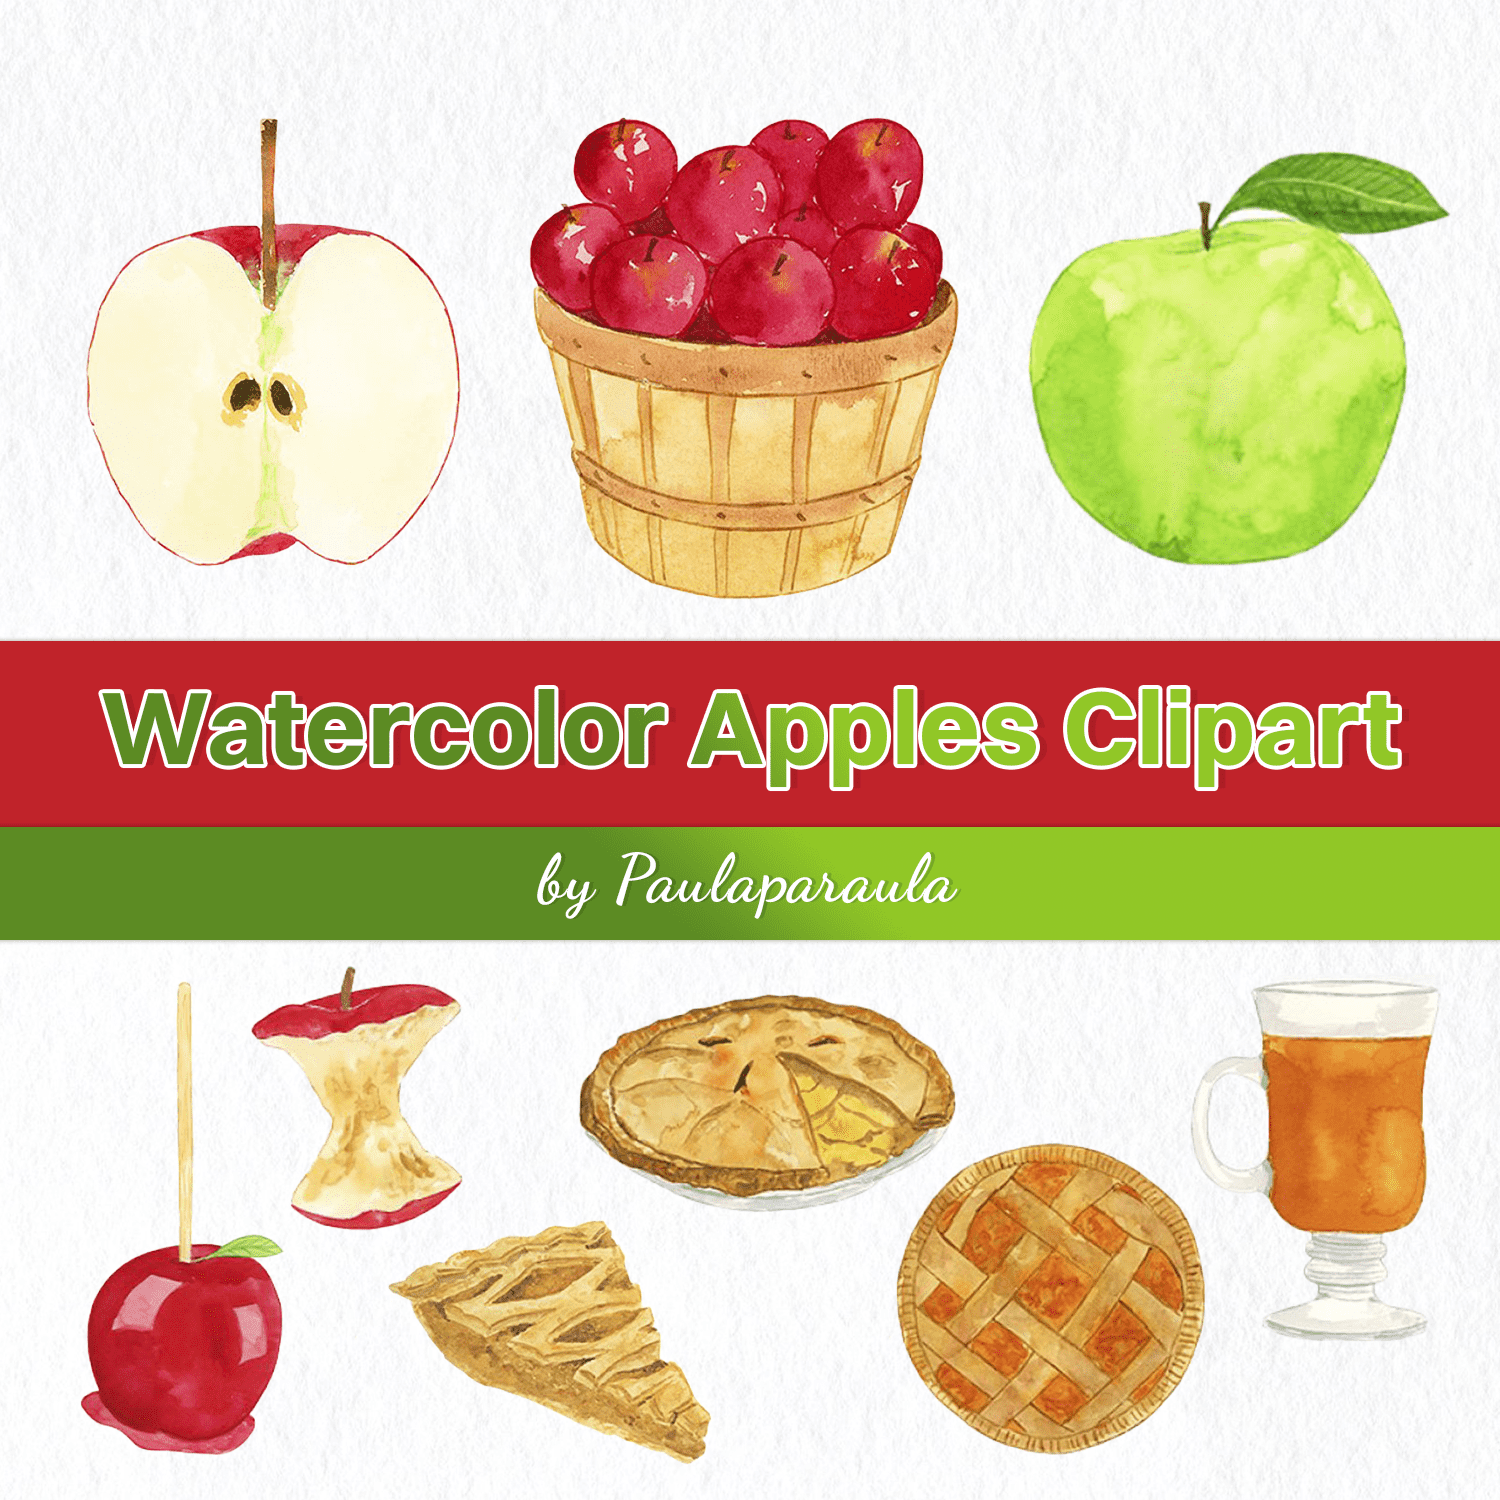 Watercolor Apples Clipart cover.